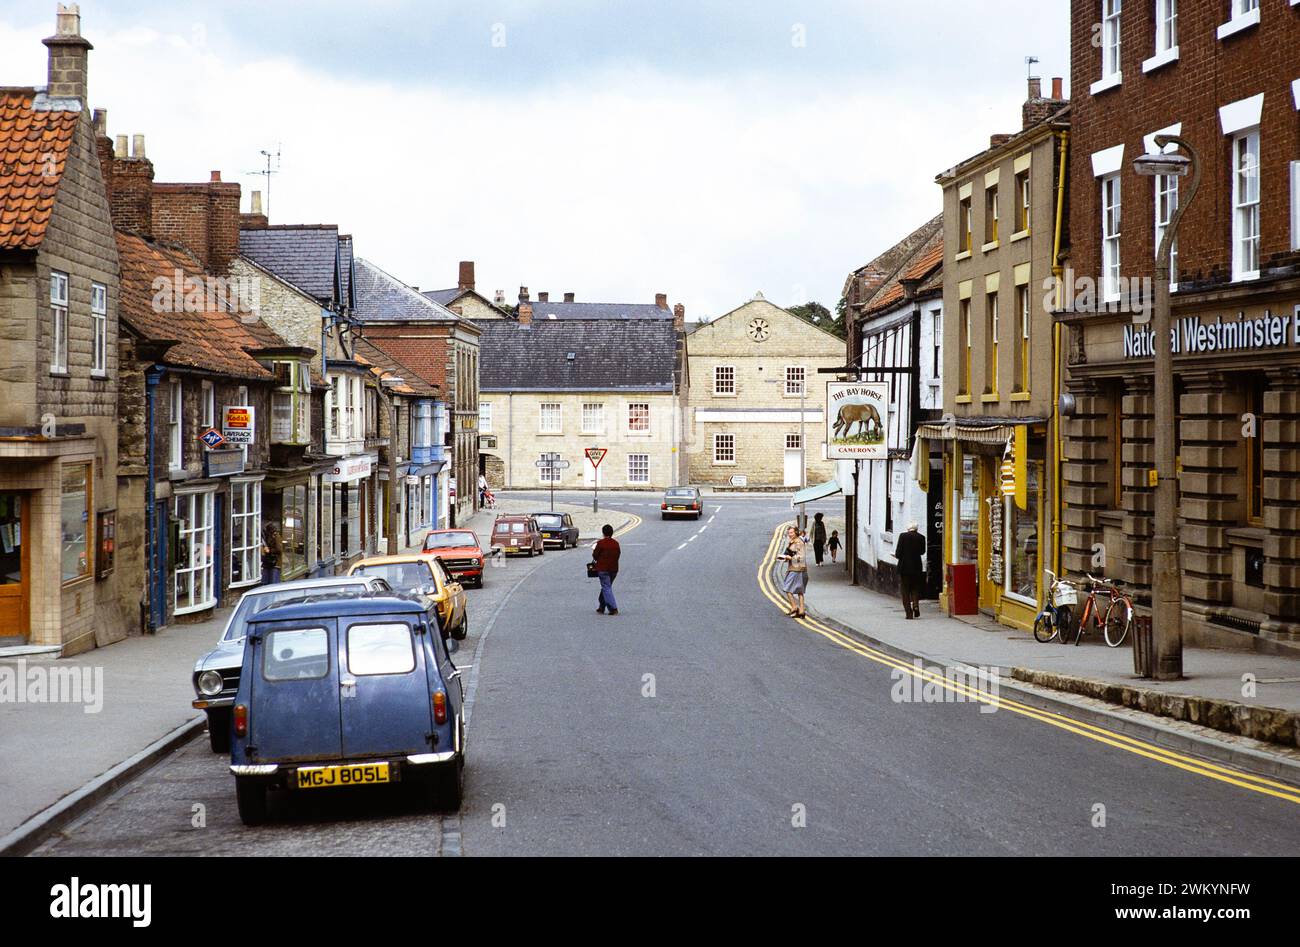 Buildings on Market Place including National Westminster bank and The Bay Horse Inn pub, Pickering, Yorkshire, England, UK June 1979 Stock Photo